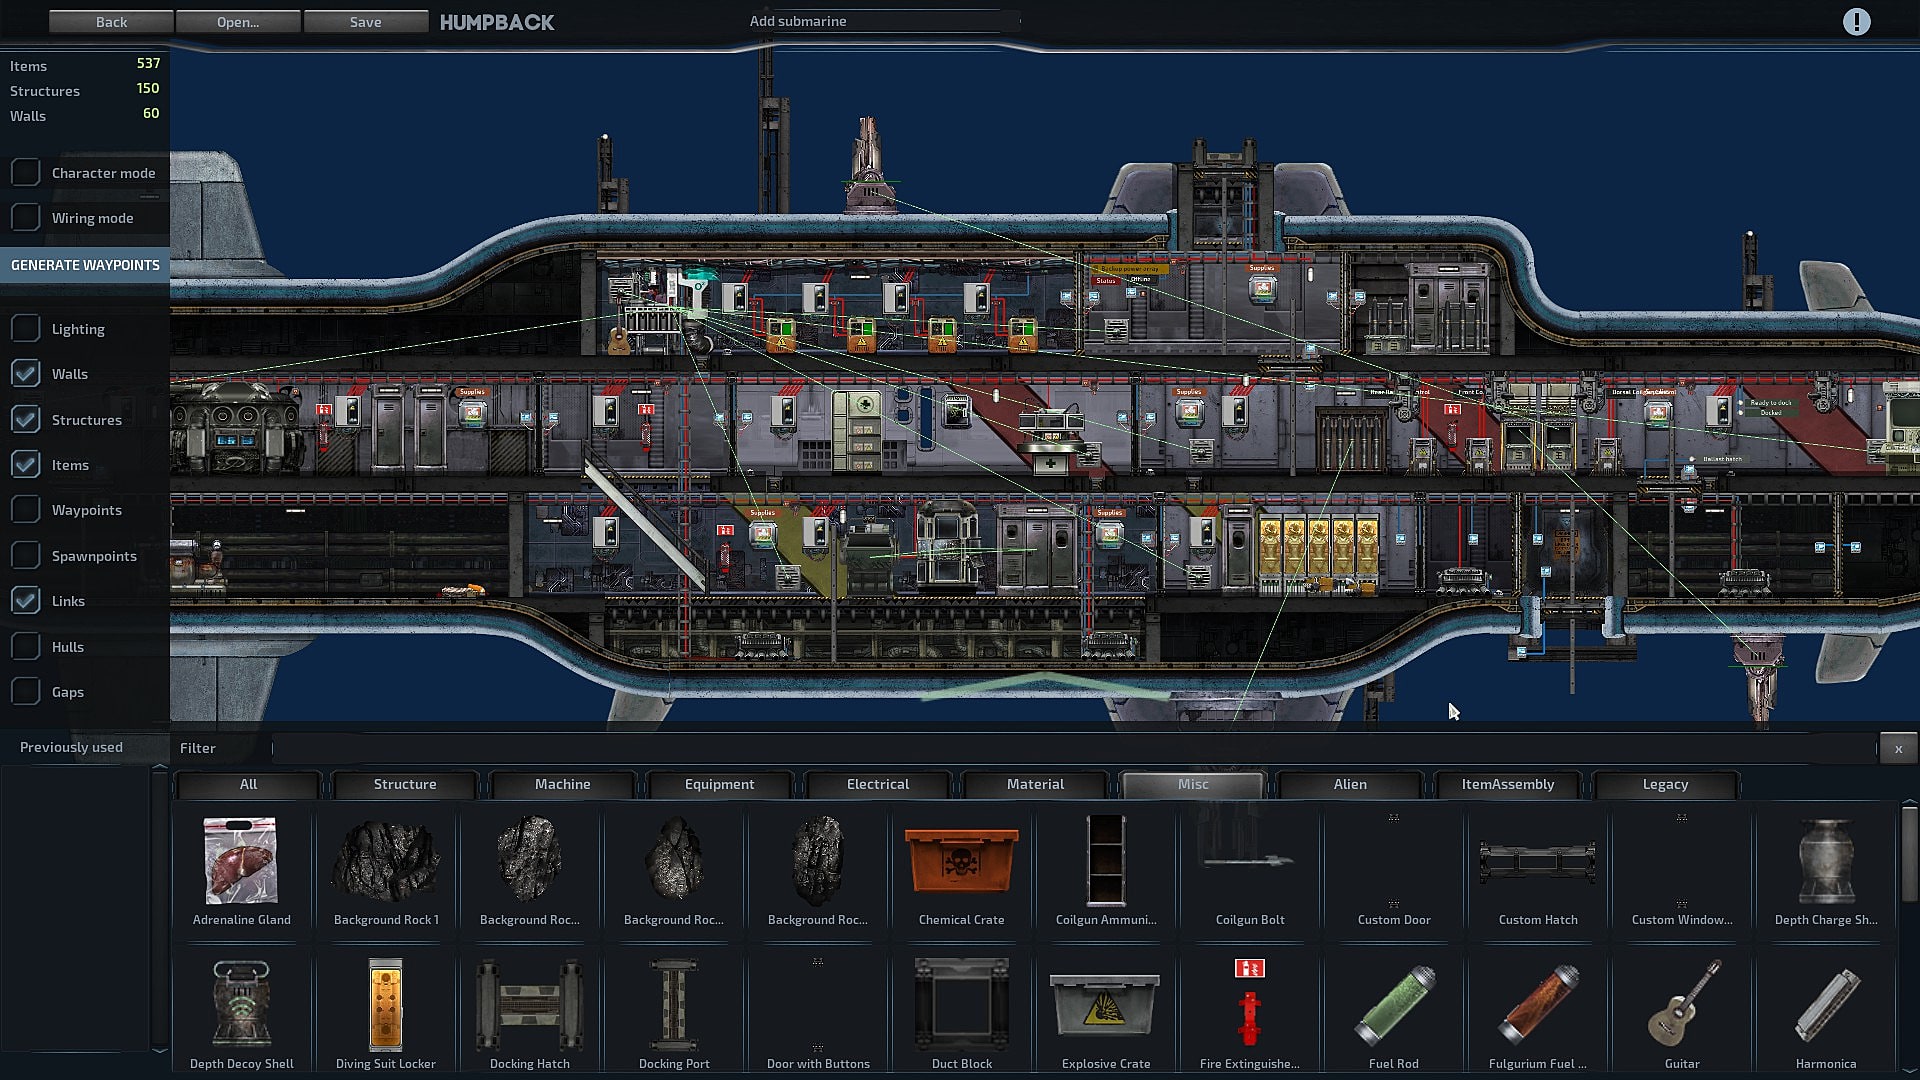 download the new version for android Barotrauma